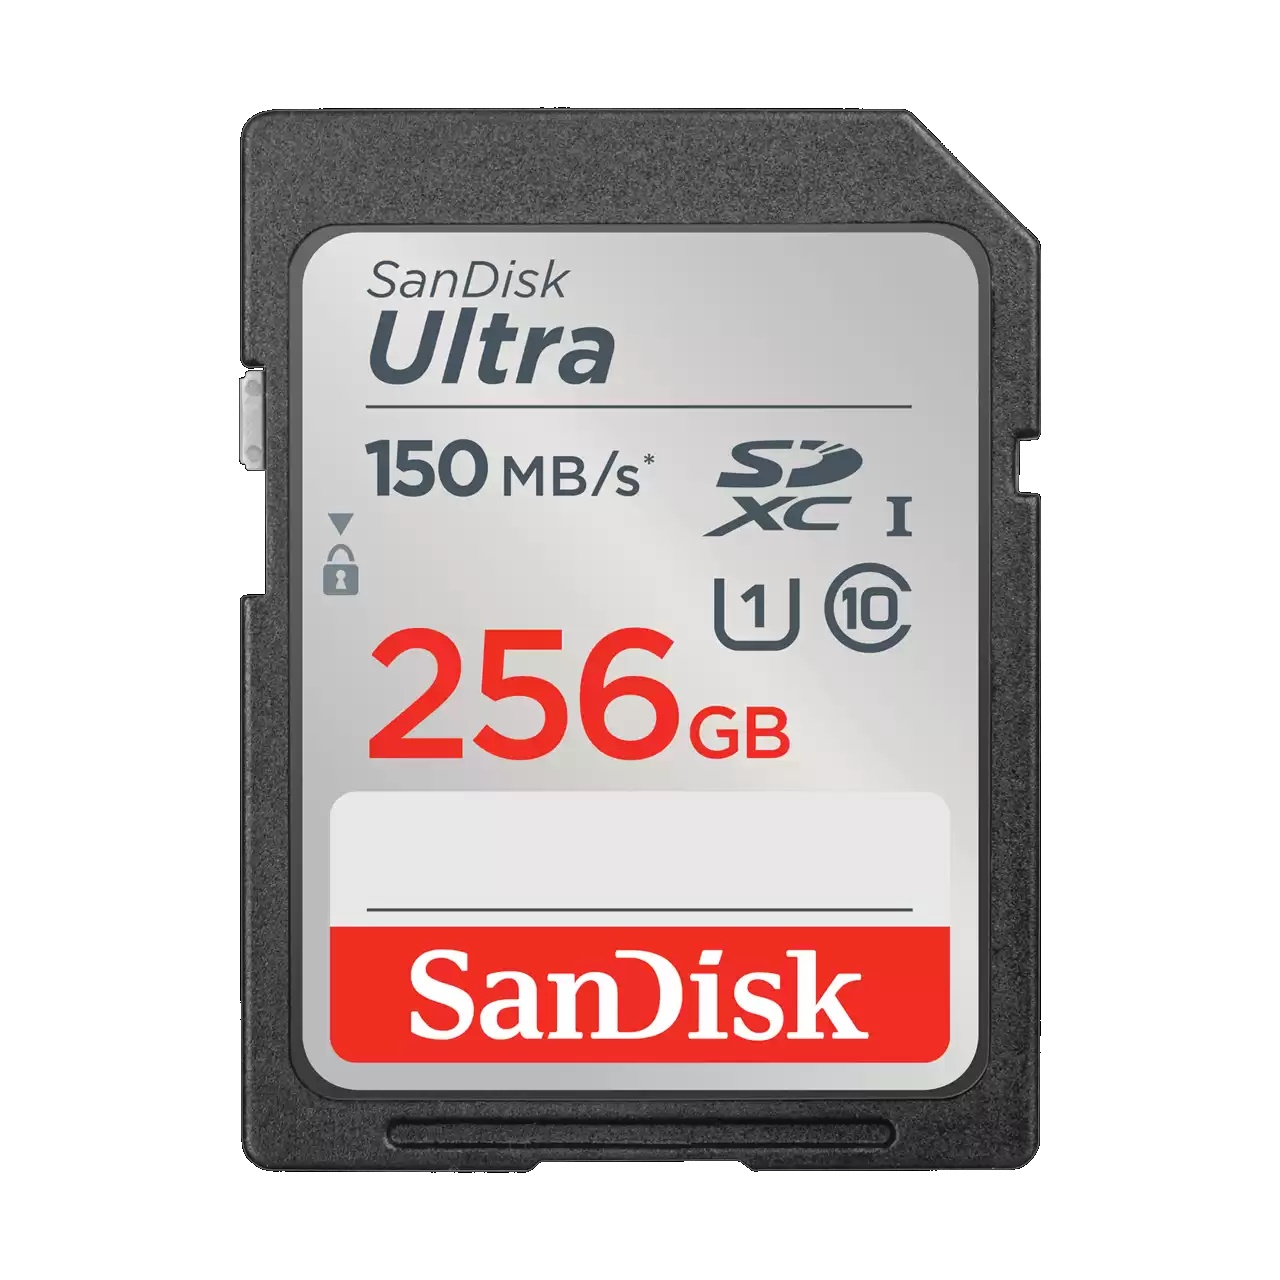 SanDisk, Ultra, 256GB, SDHC, SDXC, UHS-I, Memory, Card, 150MB/s, Full, HD, Class, 10, Speed, Shock, Proof, Temperature, Proof, Water, Proof, 